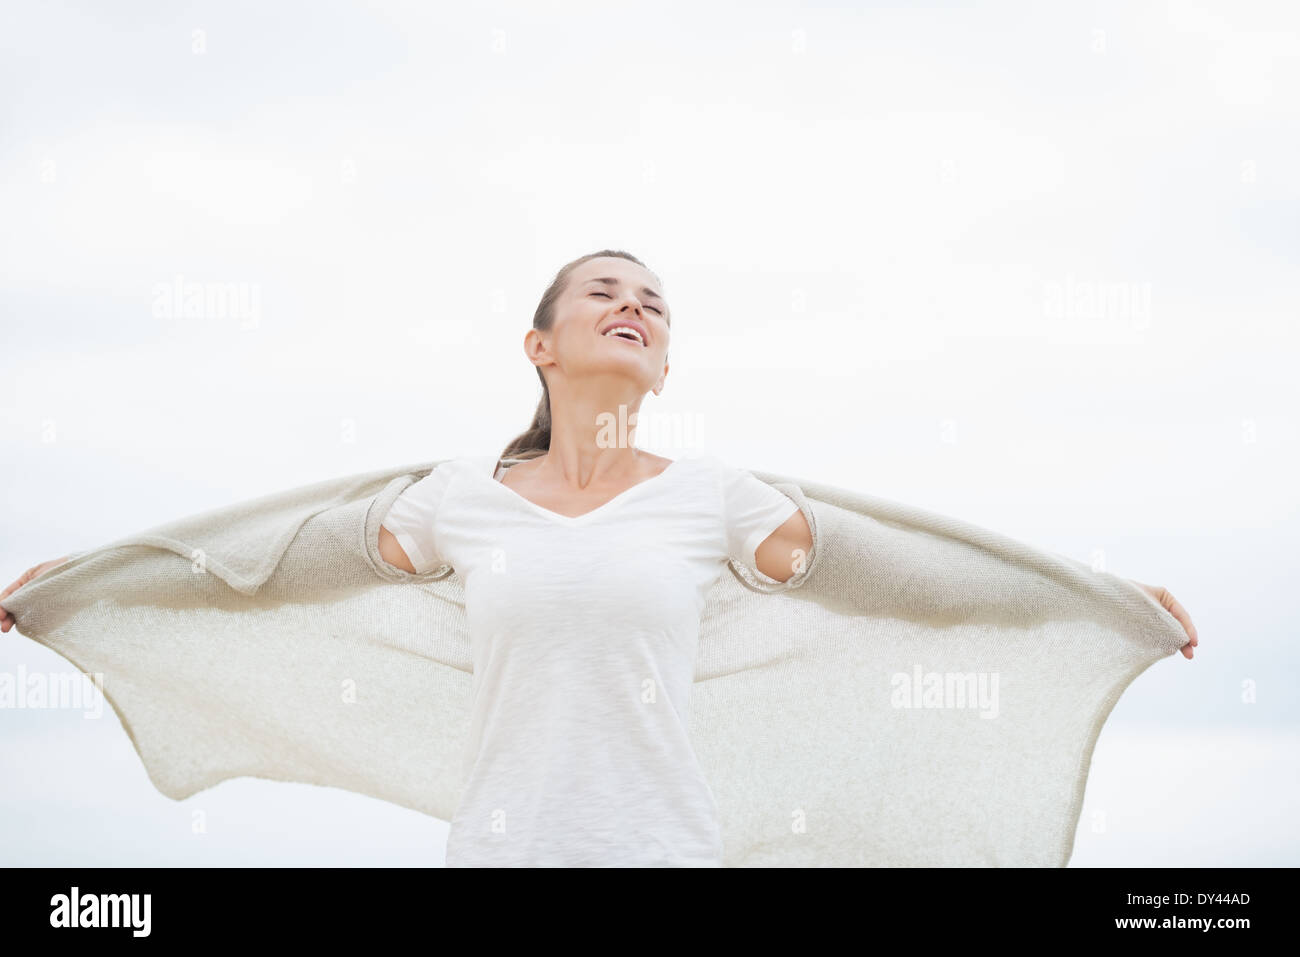 Young woman on cold beach rejoicing Stock Photo